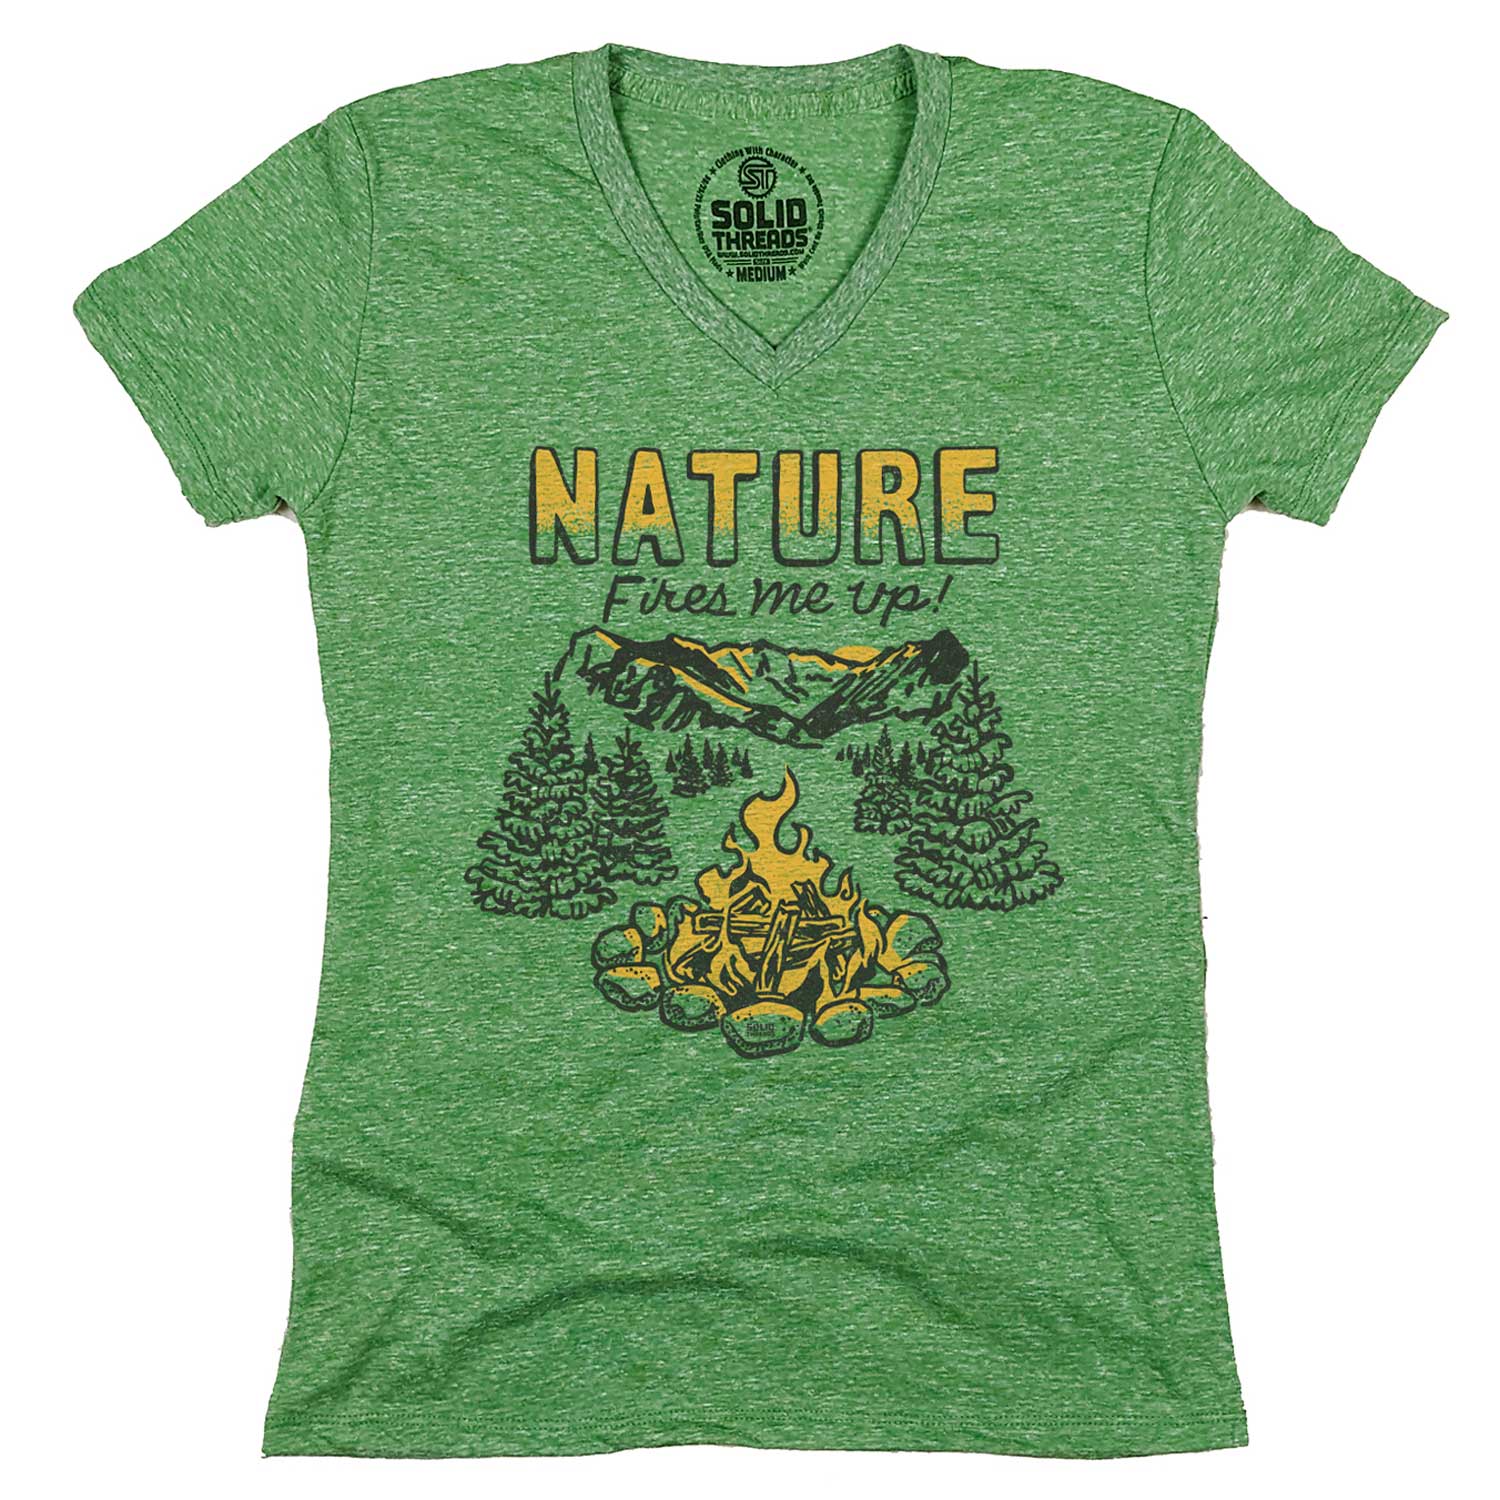 Women's Nature Fires Me Up Vintage Graphic V-Neck Tee | Funny Camping T-shirt | Solid Threads